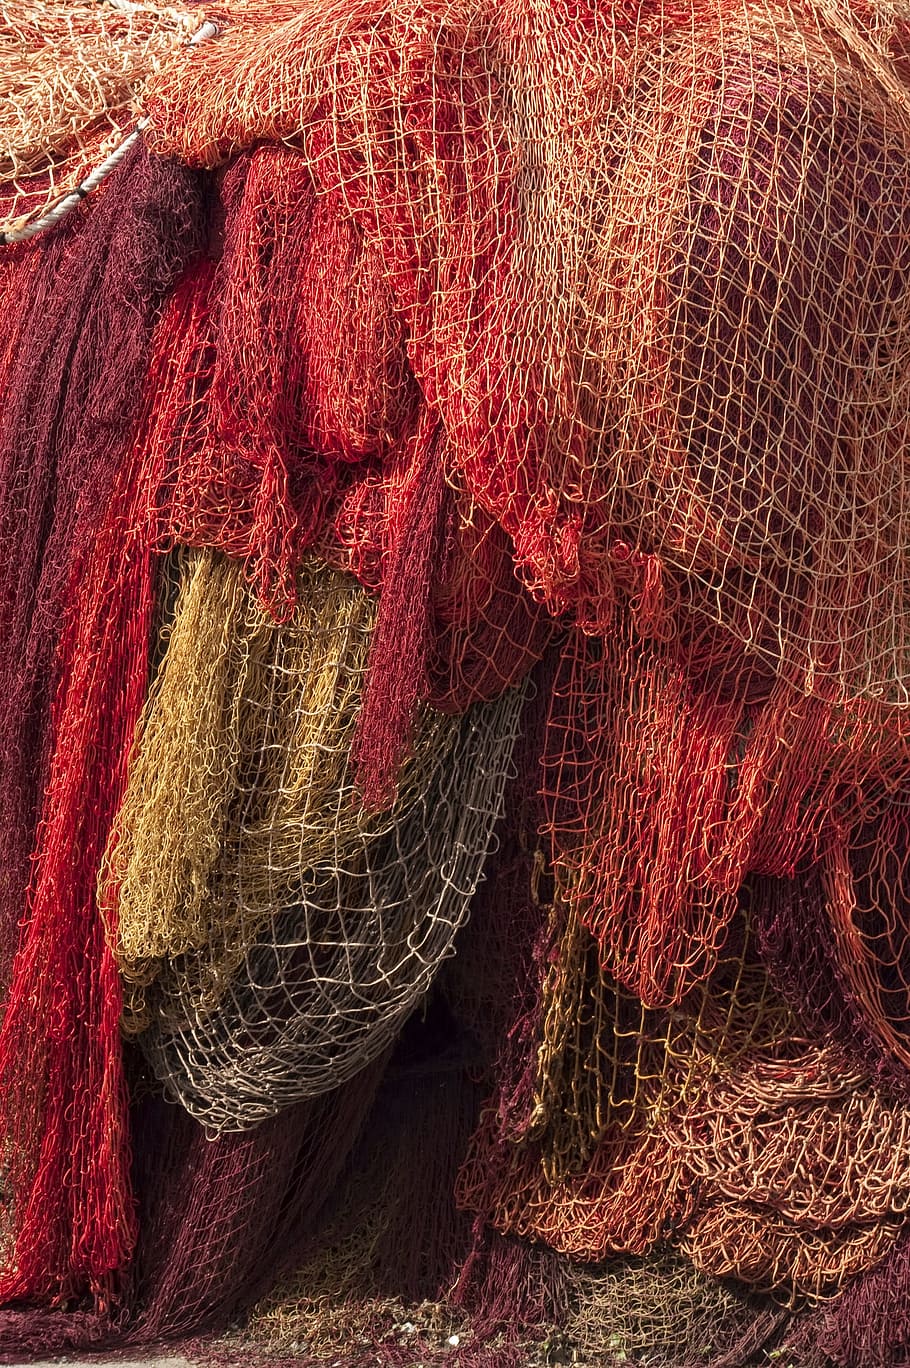 fishing, netting, red, fishing net, commercial fishing net, textile, pattern, fishing industry, day, close-up